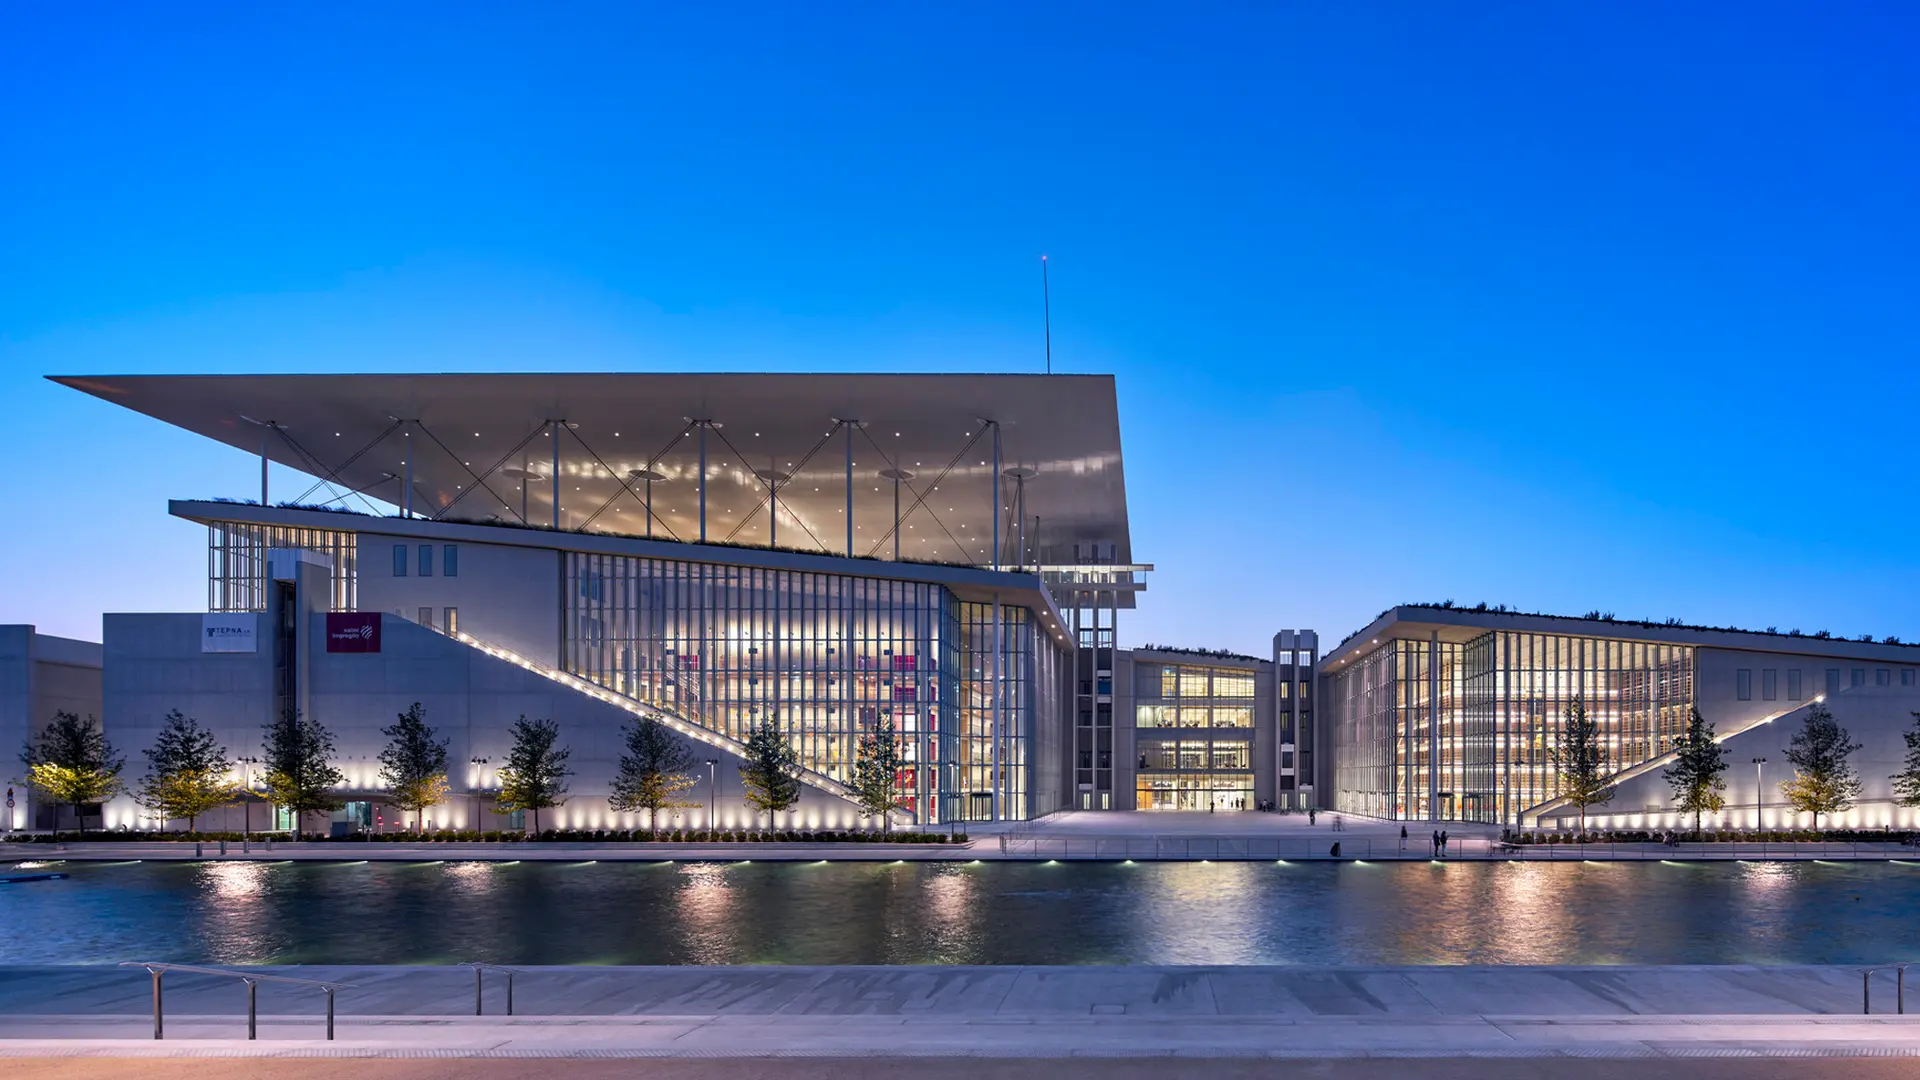 A modern cultural center by the water made of white stone with many glass windows.